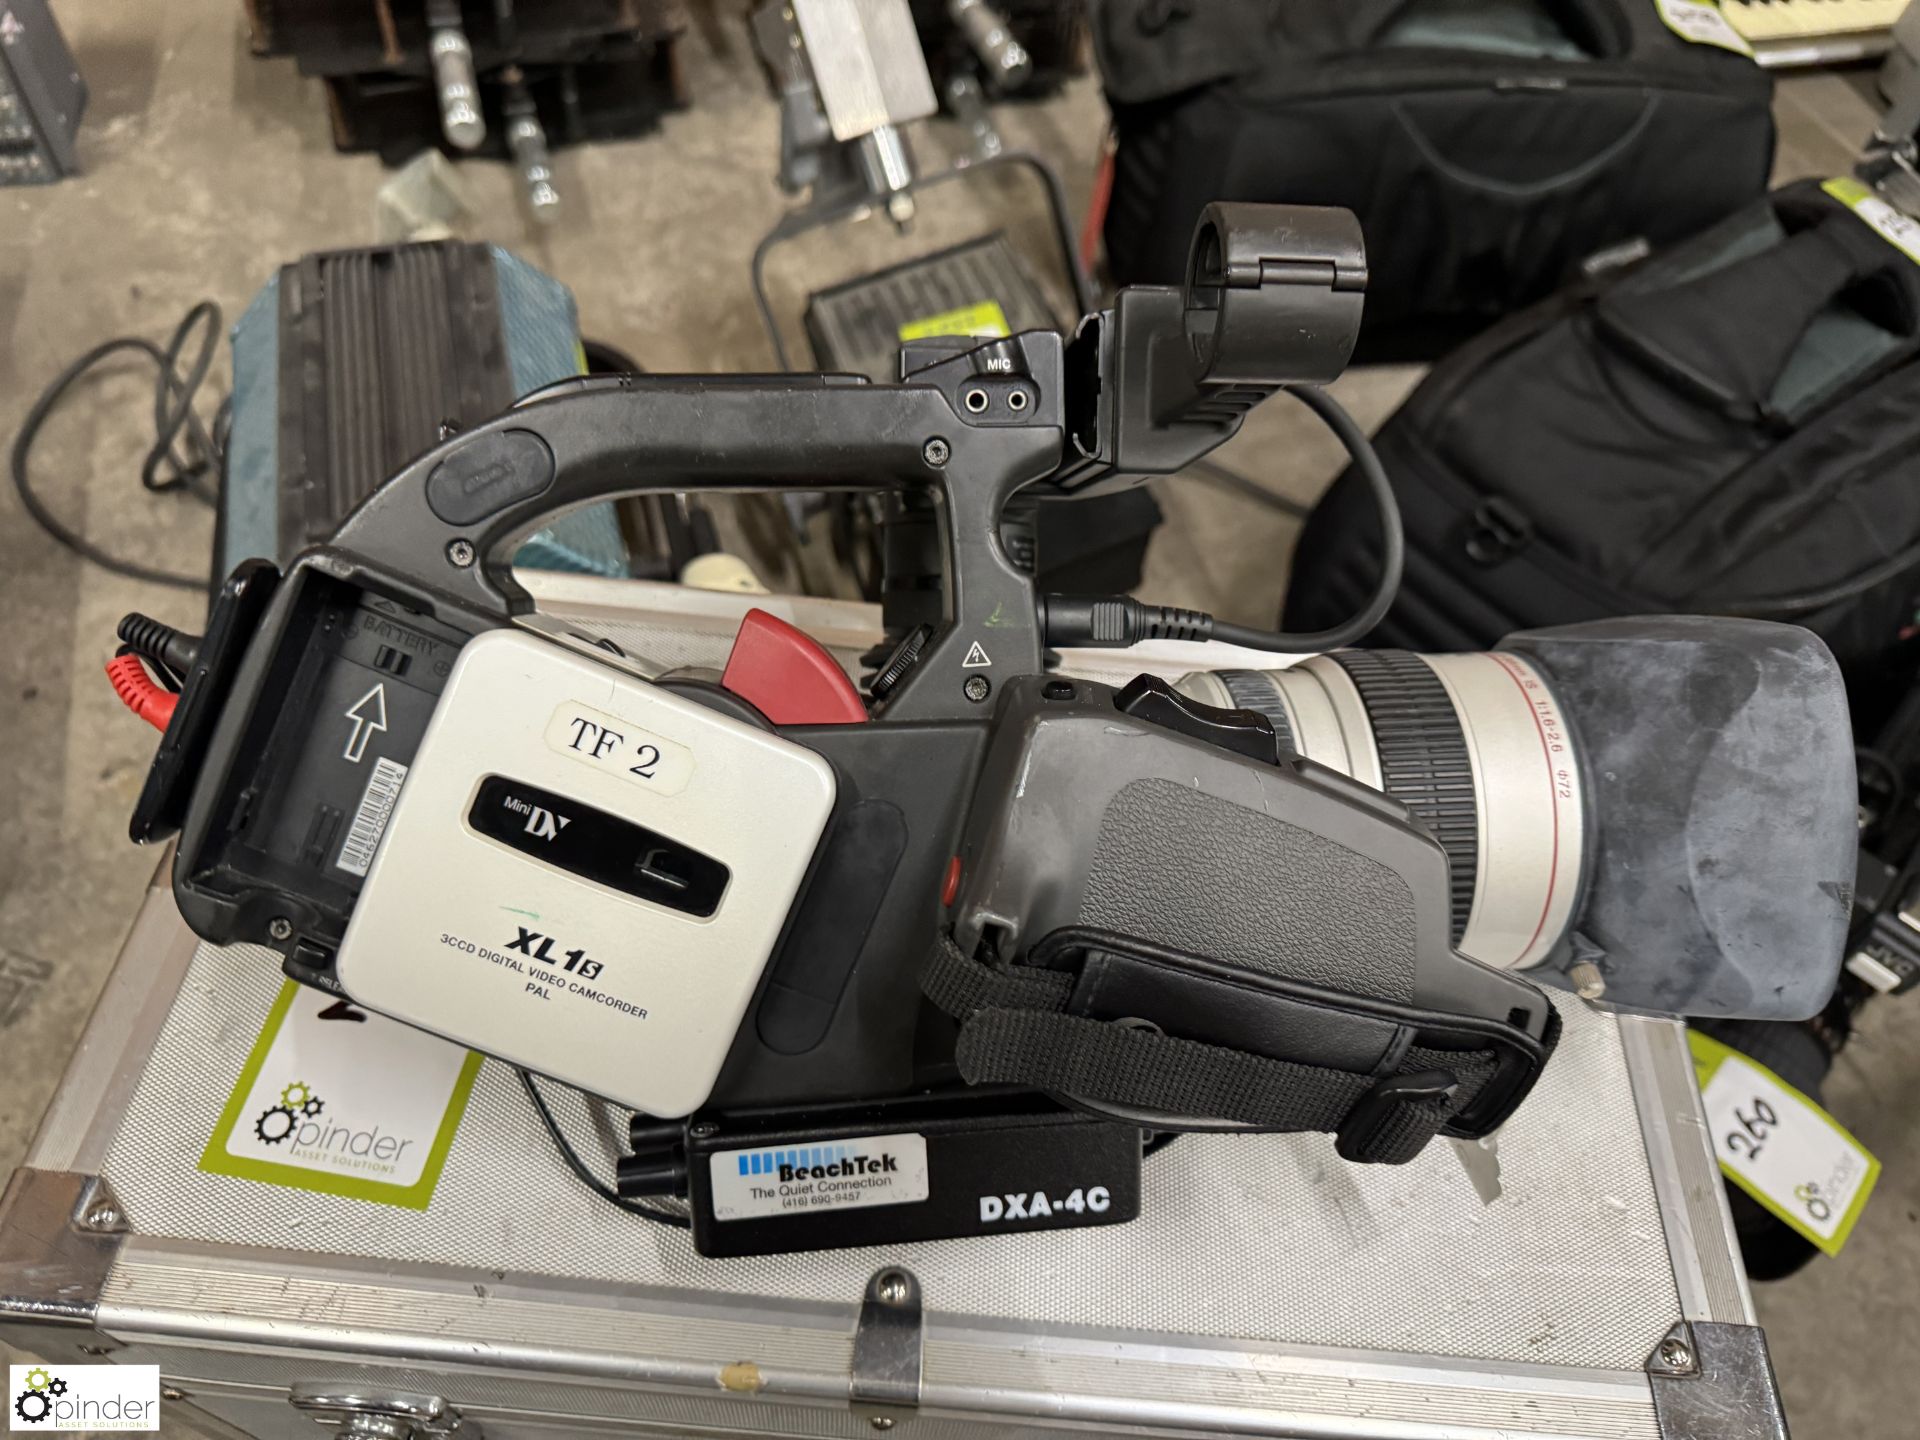 Canon DM-XL1 Digital Video Camcorder with flight case - Image 4 of 8